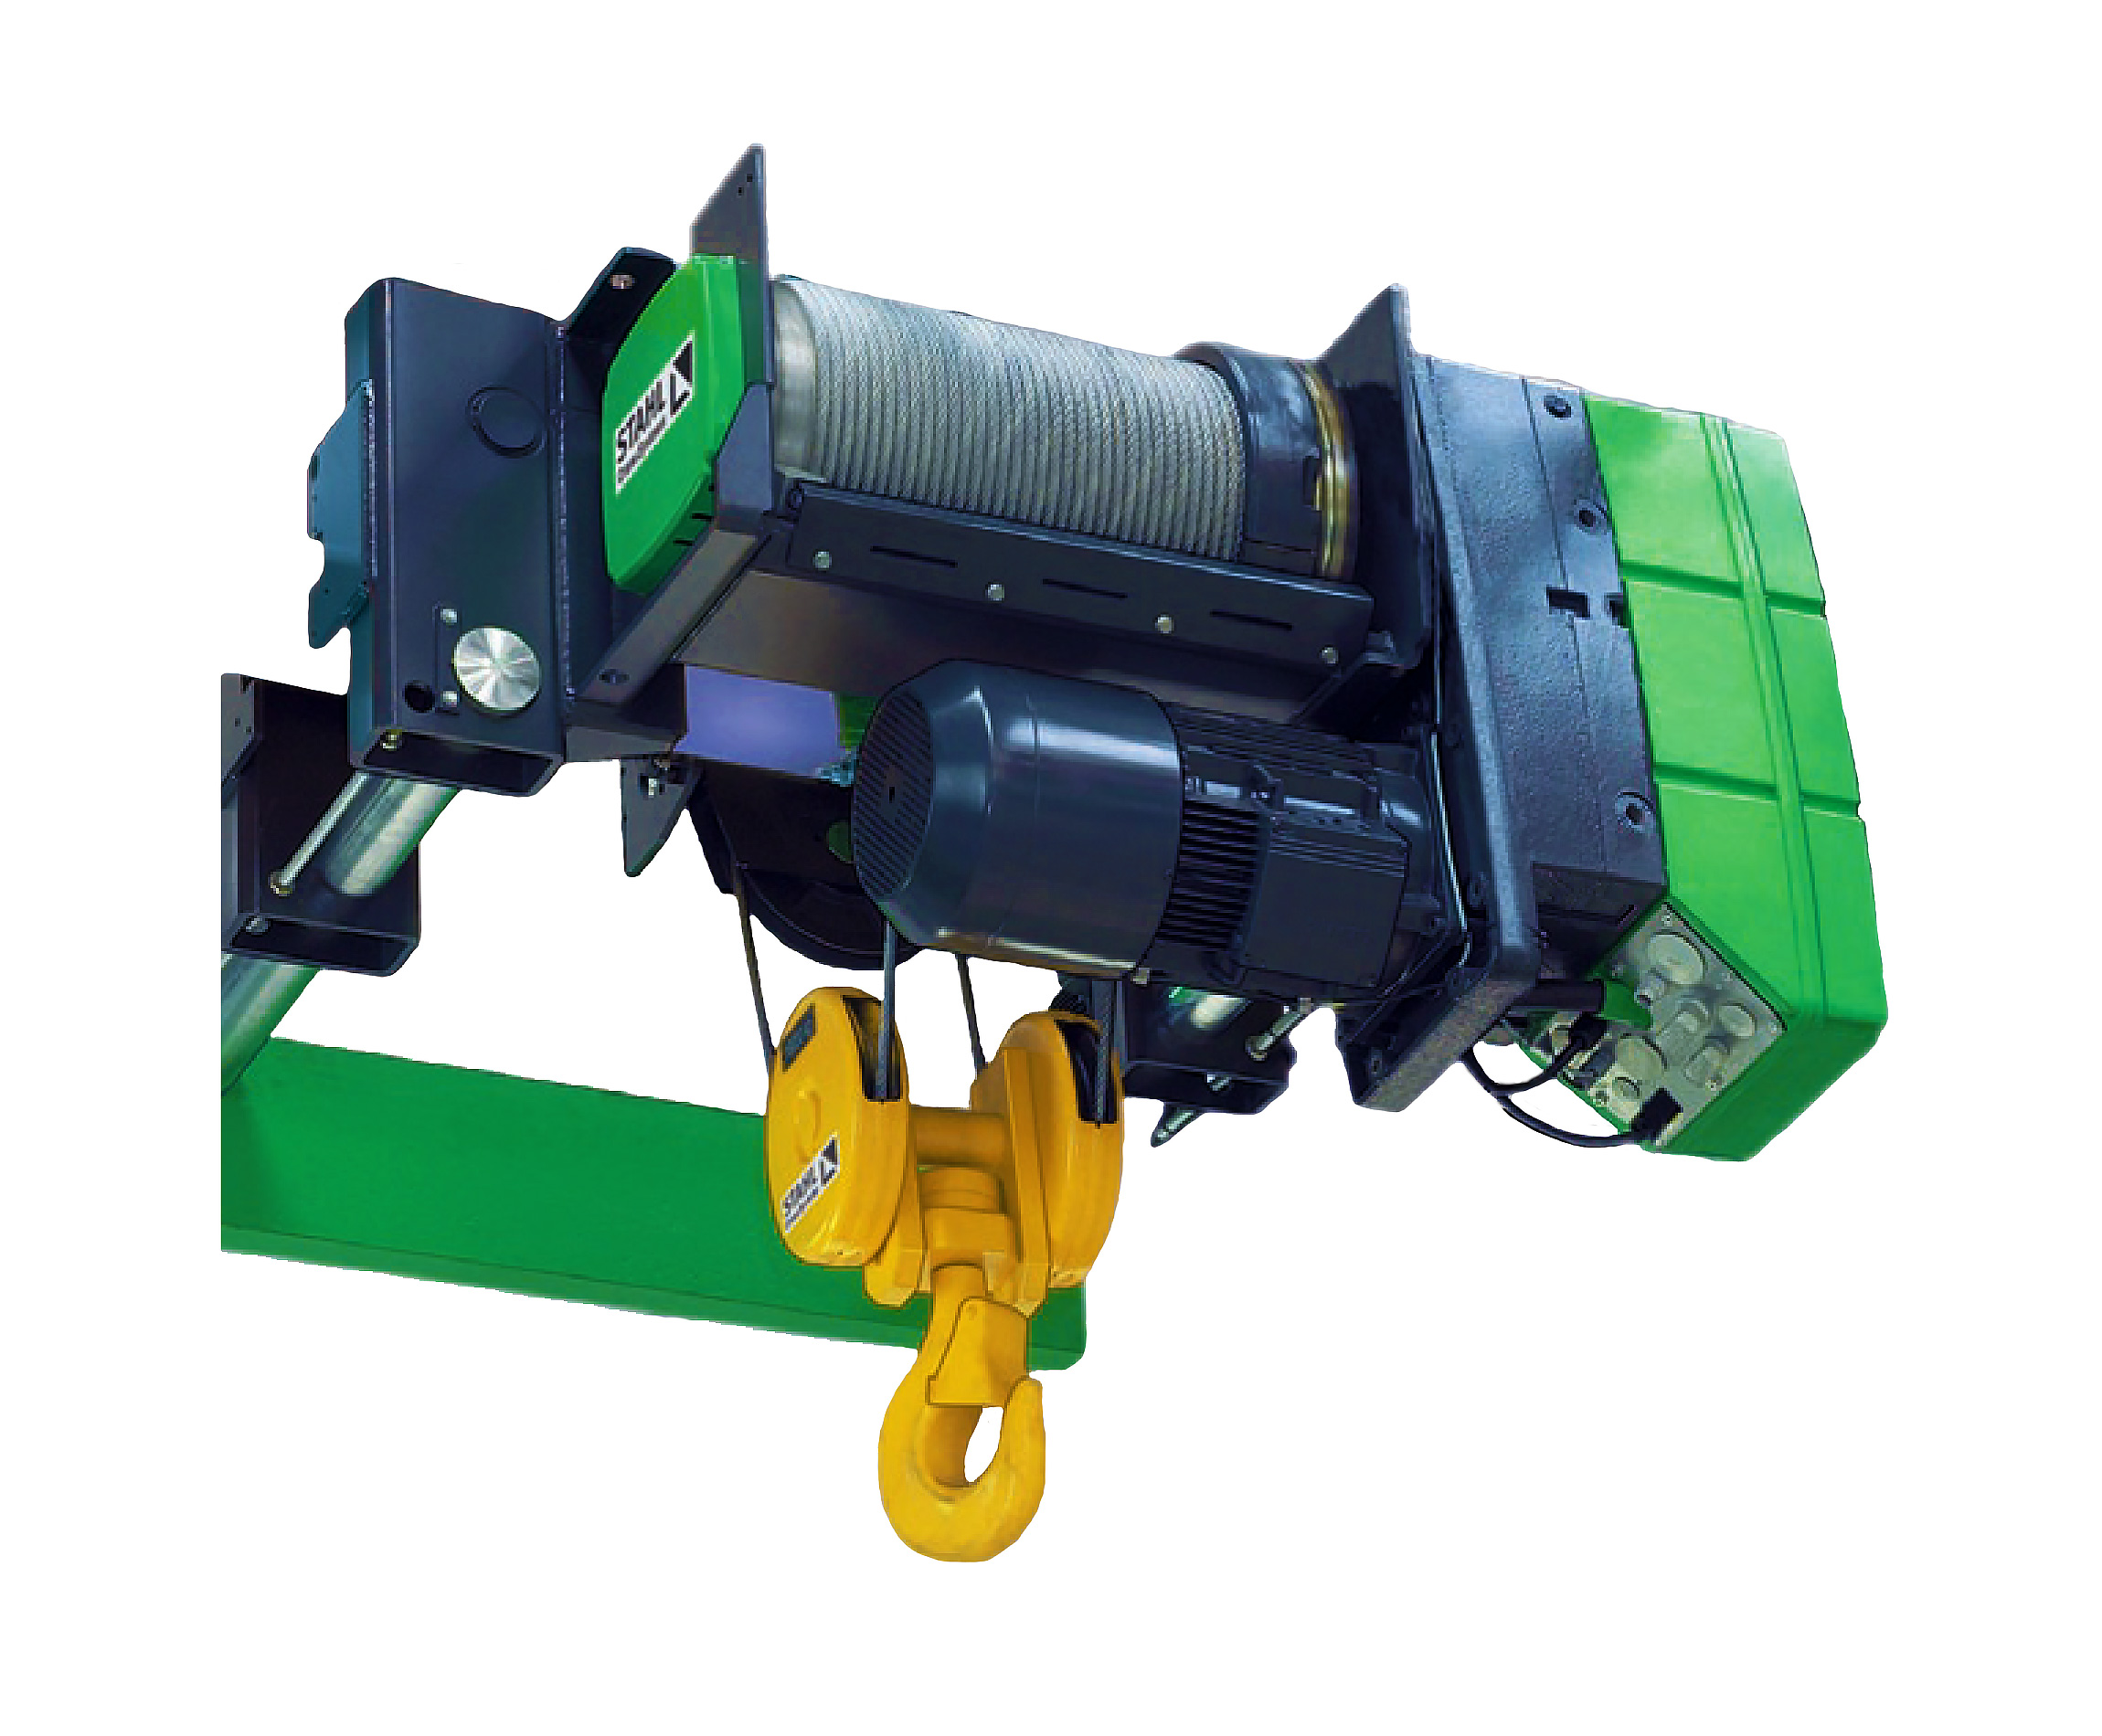 Stahl Wire Rope Hoists, Stahl Crane Systems